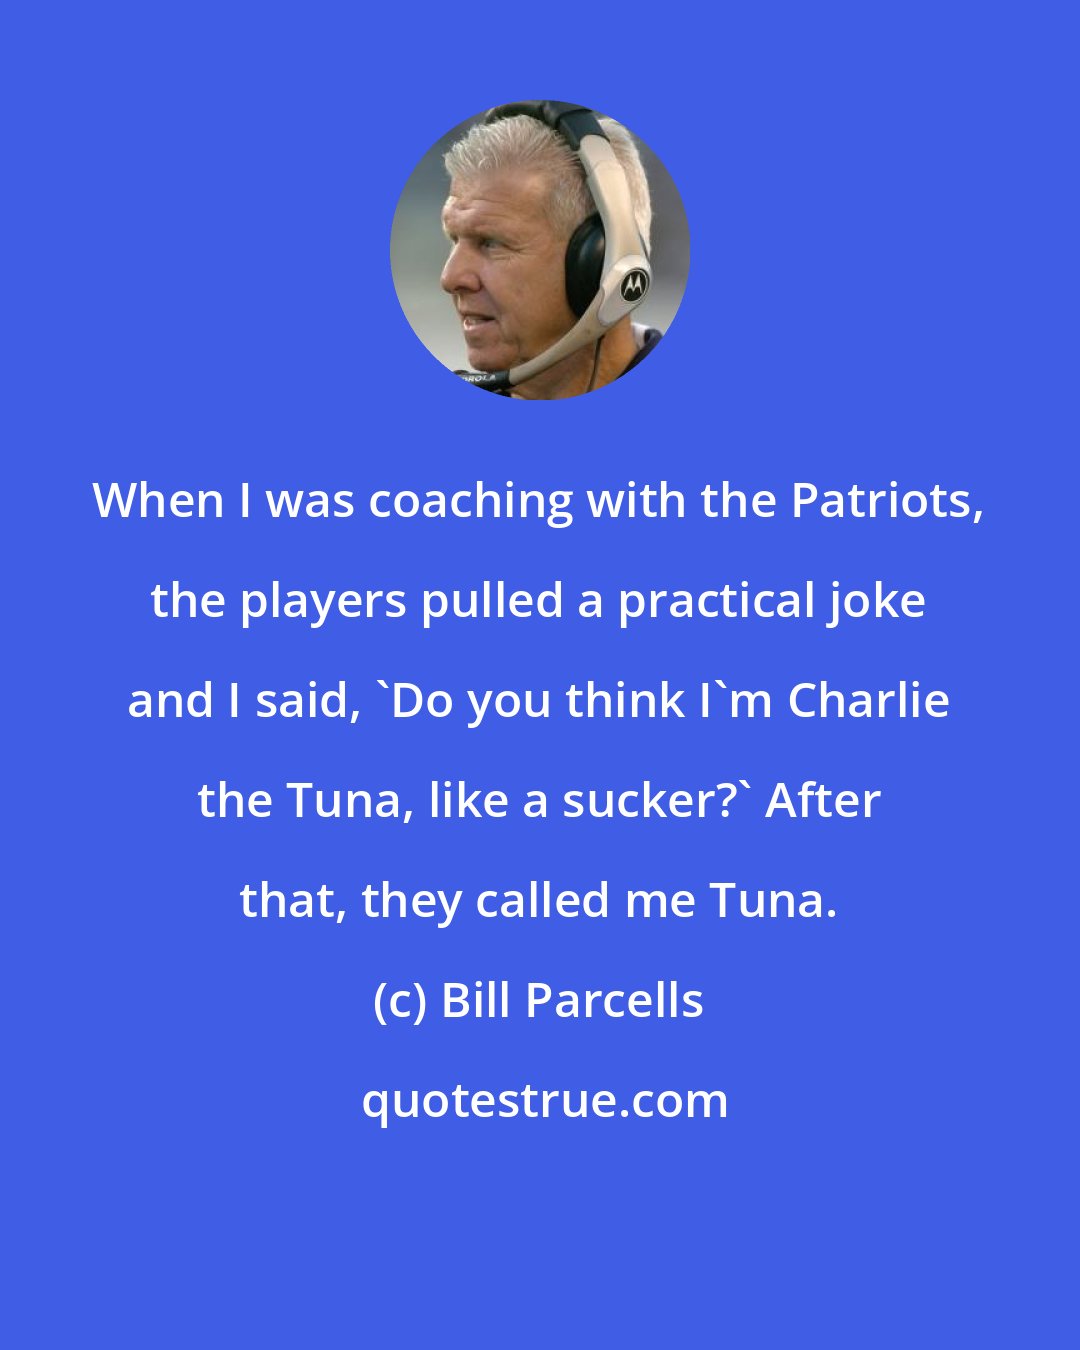 Bill Parcells: When I was coaching with the Patriots, the players pulled a practical joke and I said, 'Do you think I'm Charlie the Tuna, like a sucker?' After that, they called me Tuna.